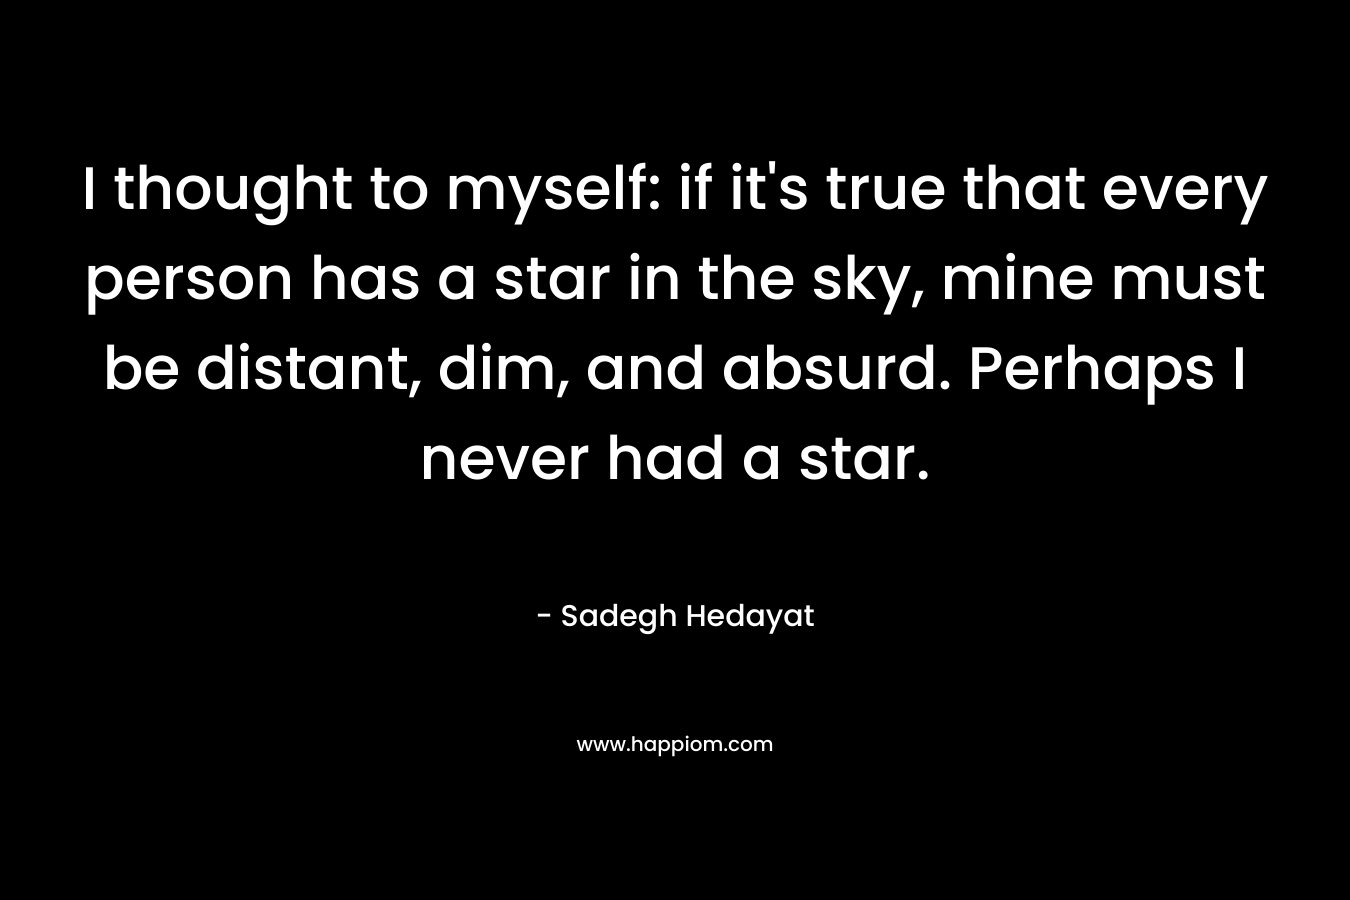 I thought to myself: if it's true that every person has a star in the sky, mine must be distant, dim, and absurd. Perhaps I never had a star.